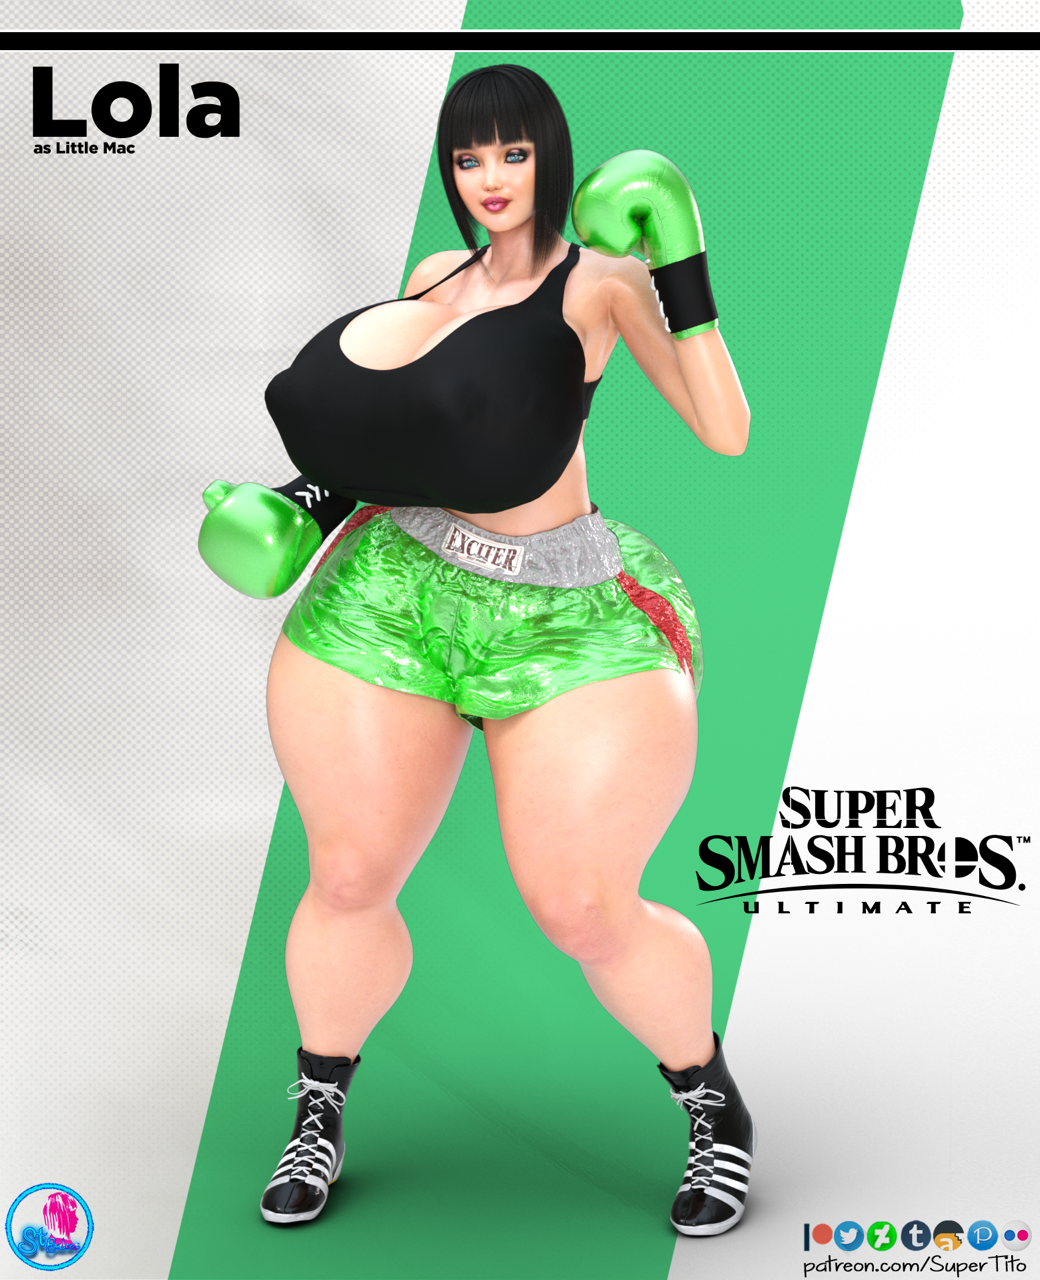 Today is pic is Lola as Little Mac&ldquo;Show &lsquo;em what you got, Mac